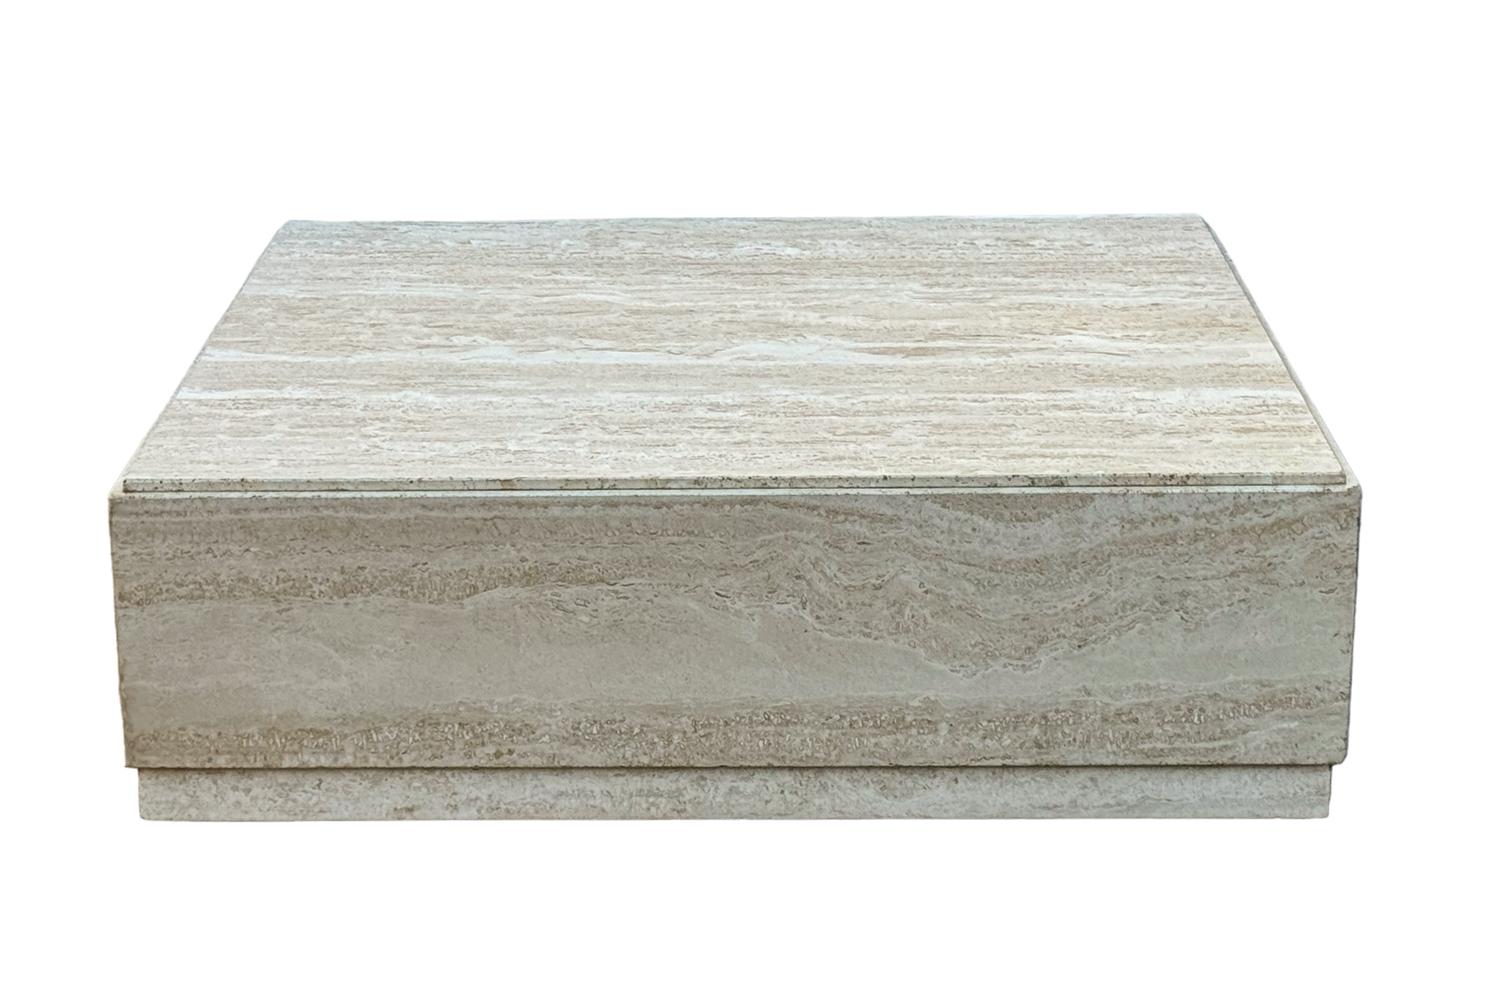 Low Midcentury Italian Modern Square Travertine Marble Cube Cocktail Table  For Sale 1